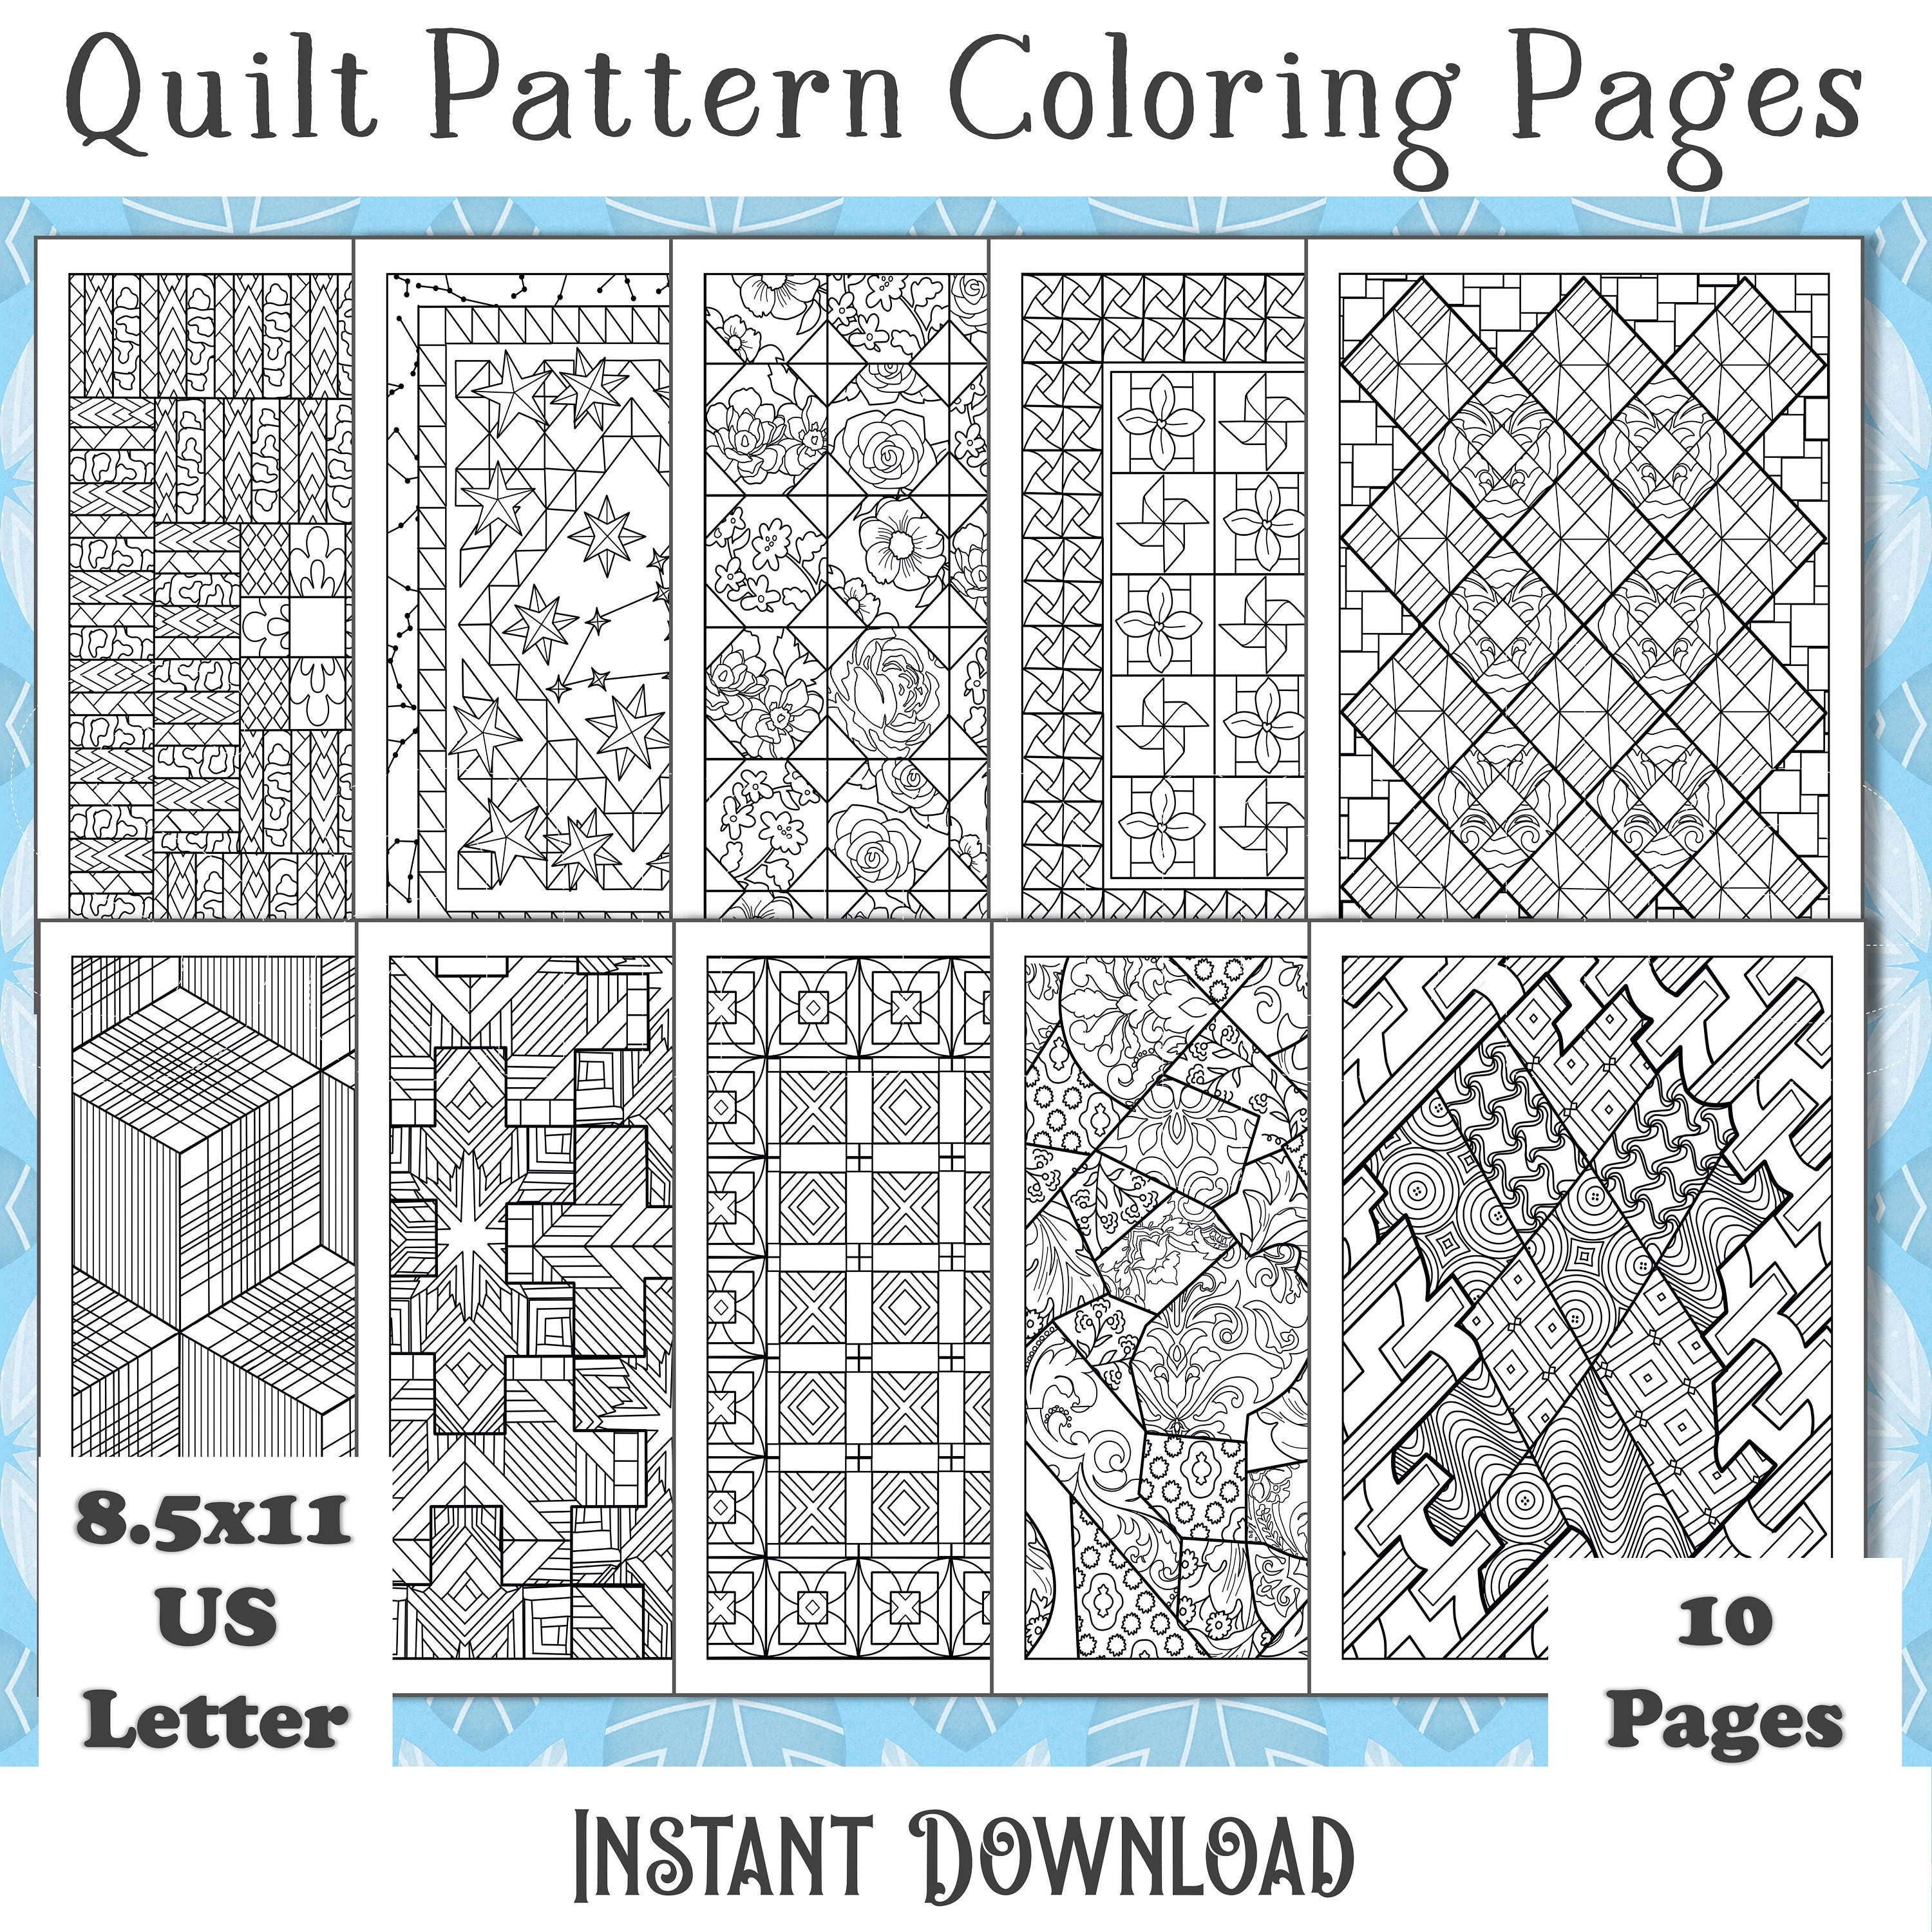 Quilt pattern printable coloring pages adult coloring activity instant digital download pattern pages